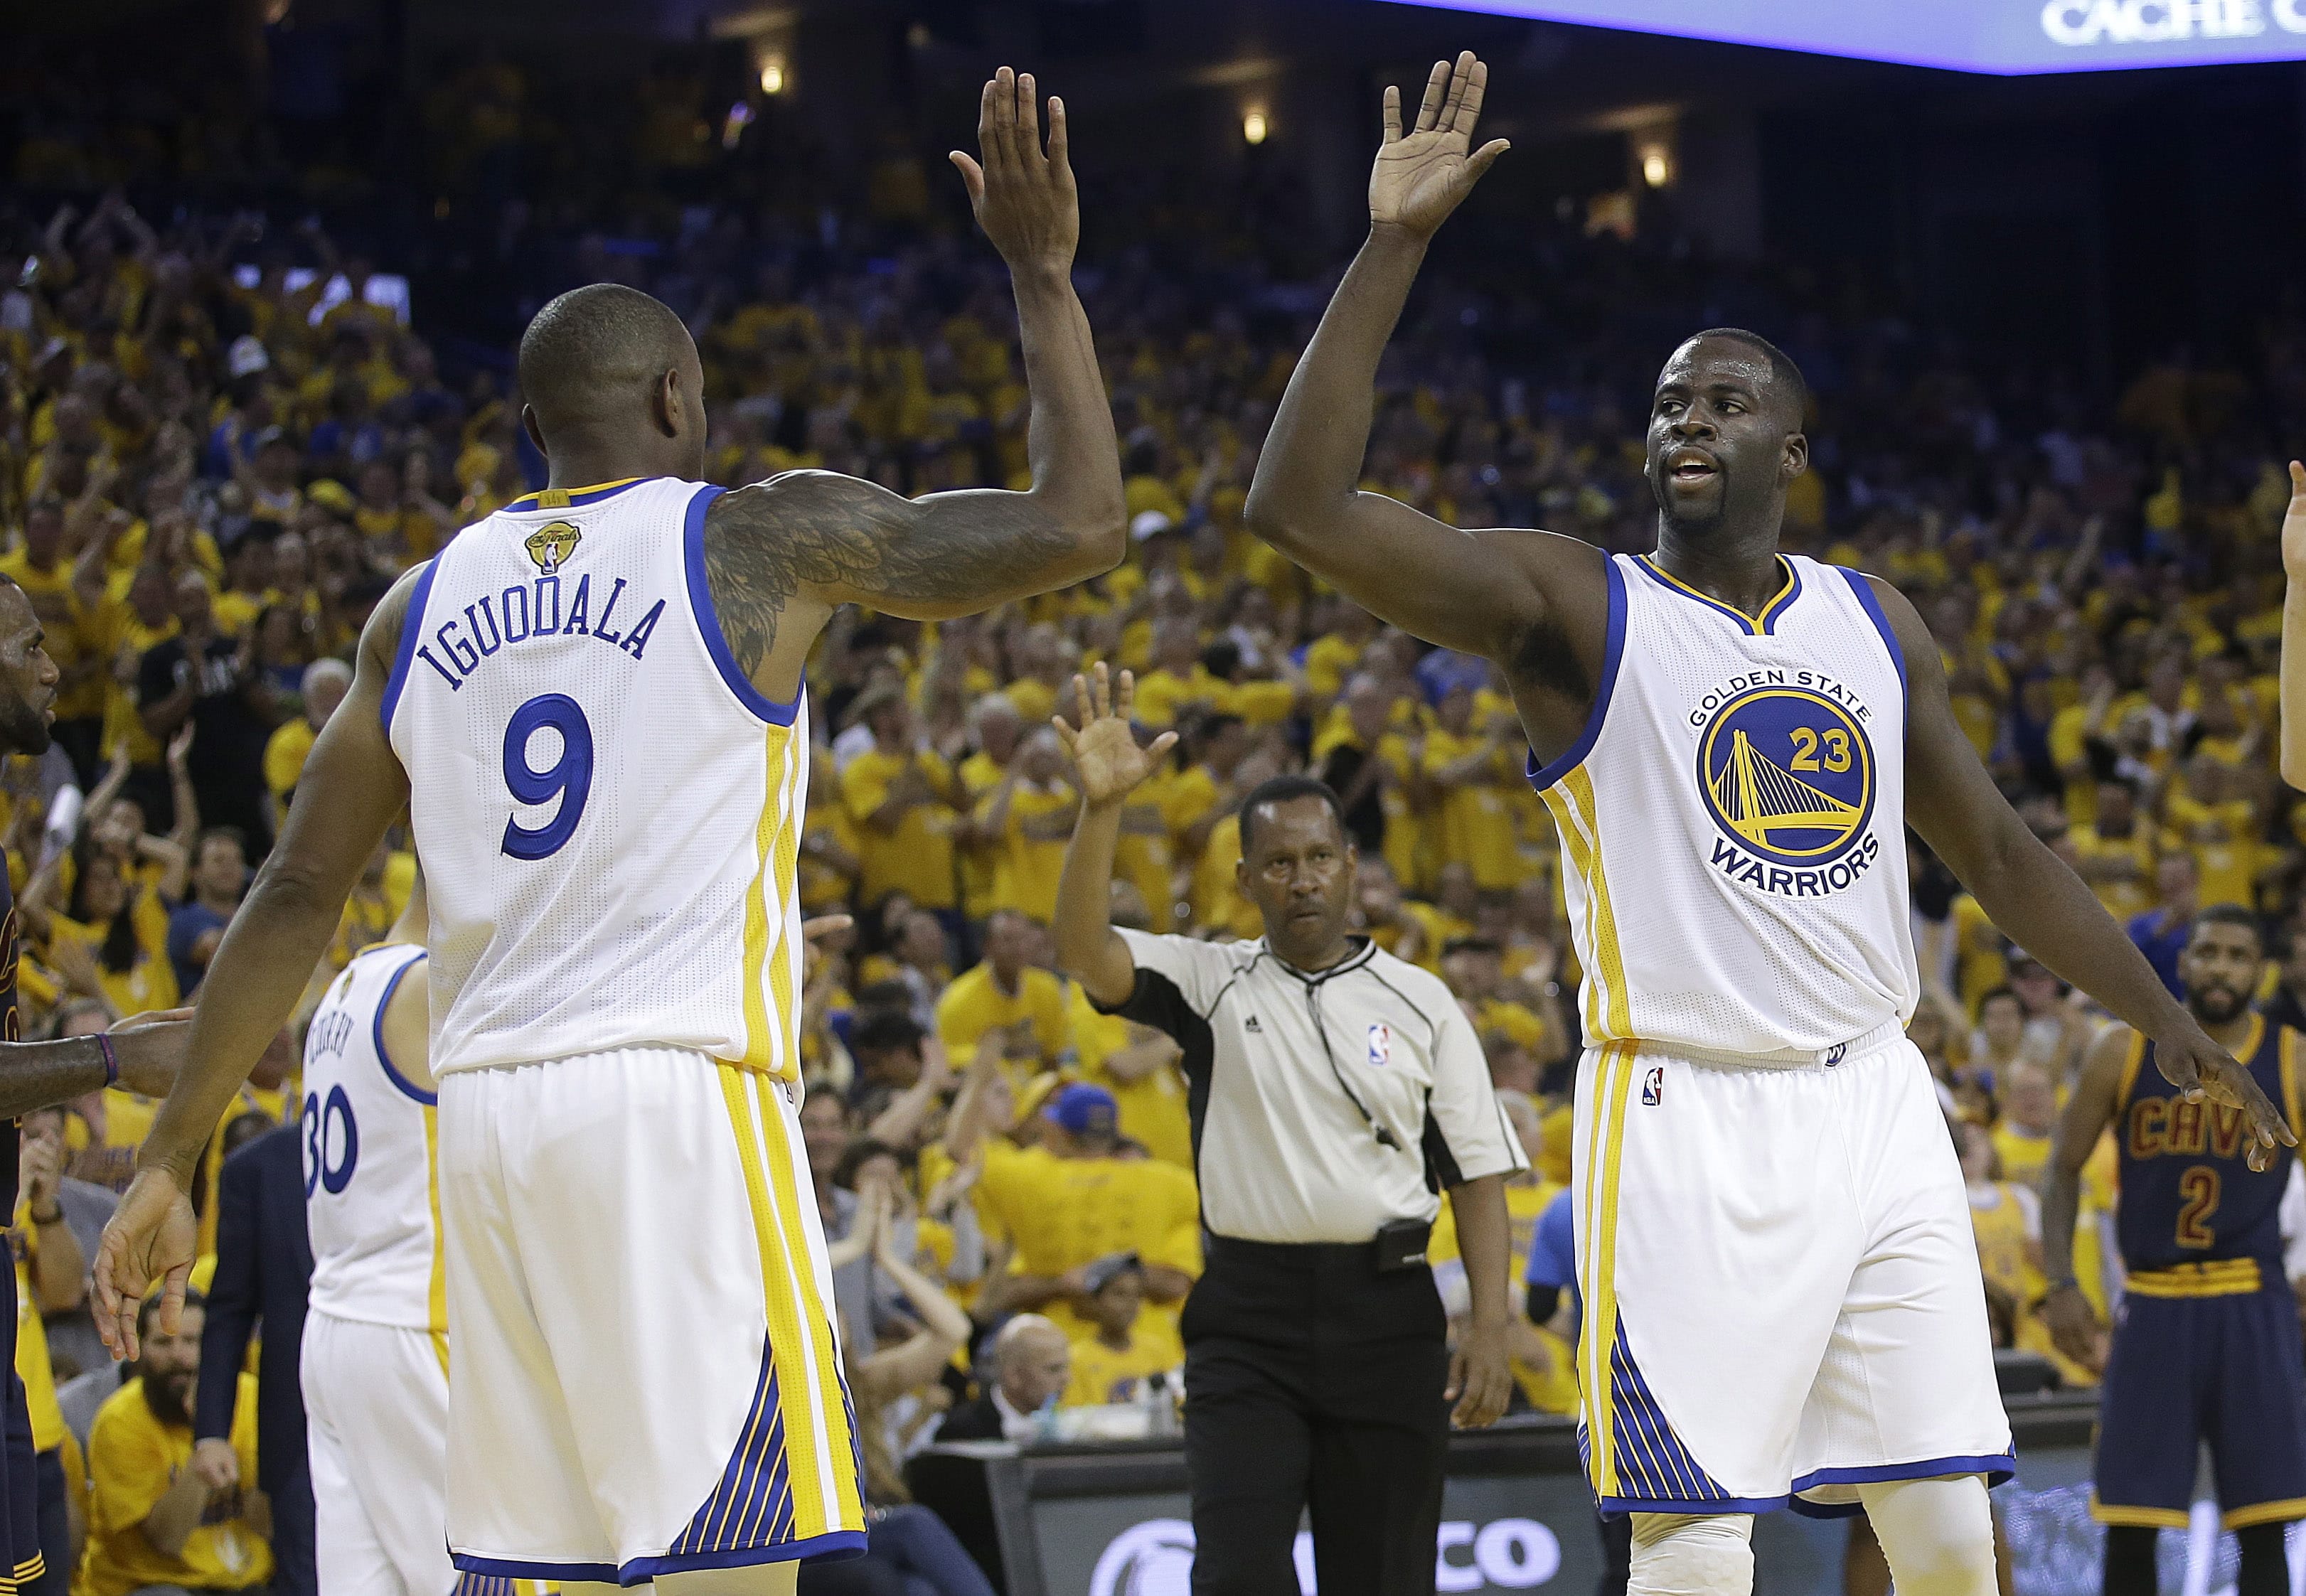 Golden State Warriors forward Draymond Green (23) and forward Andre Iguodala (9) celebrate during the first half of Game 2 of basketball's NBA Finals between the Warriors and the Cleveland Cavaliers in Oakland, Calif., Sunday, June 5, 2016.